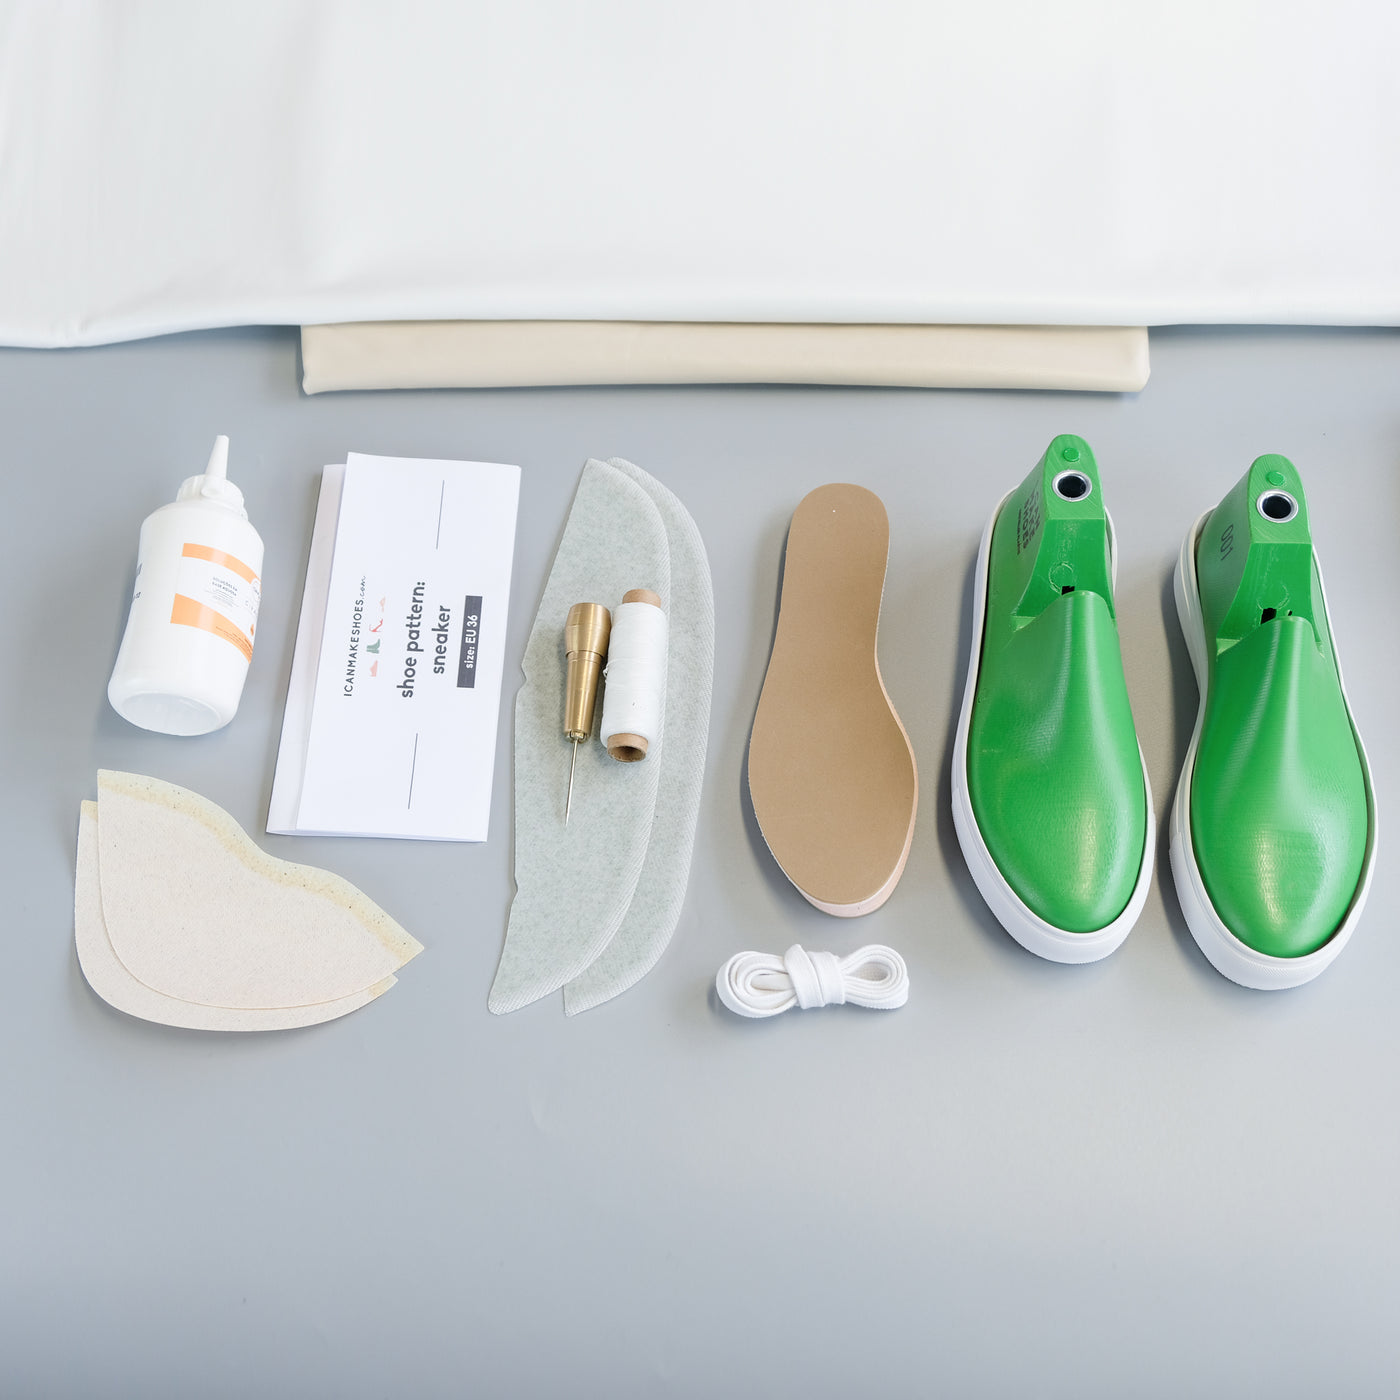 I Can Make Shoes Kit for making sneakers from home